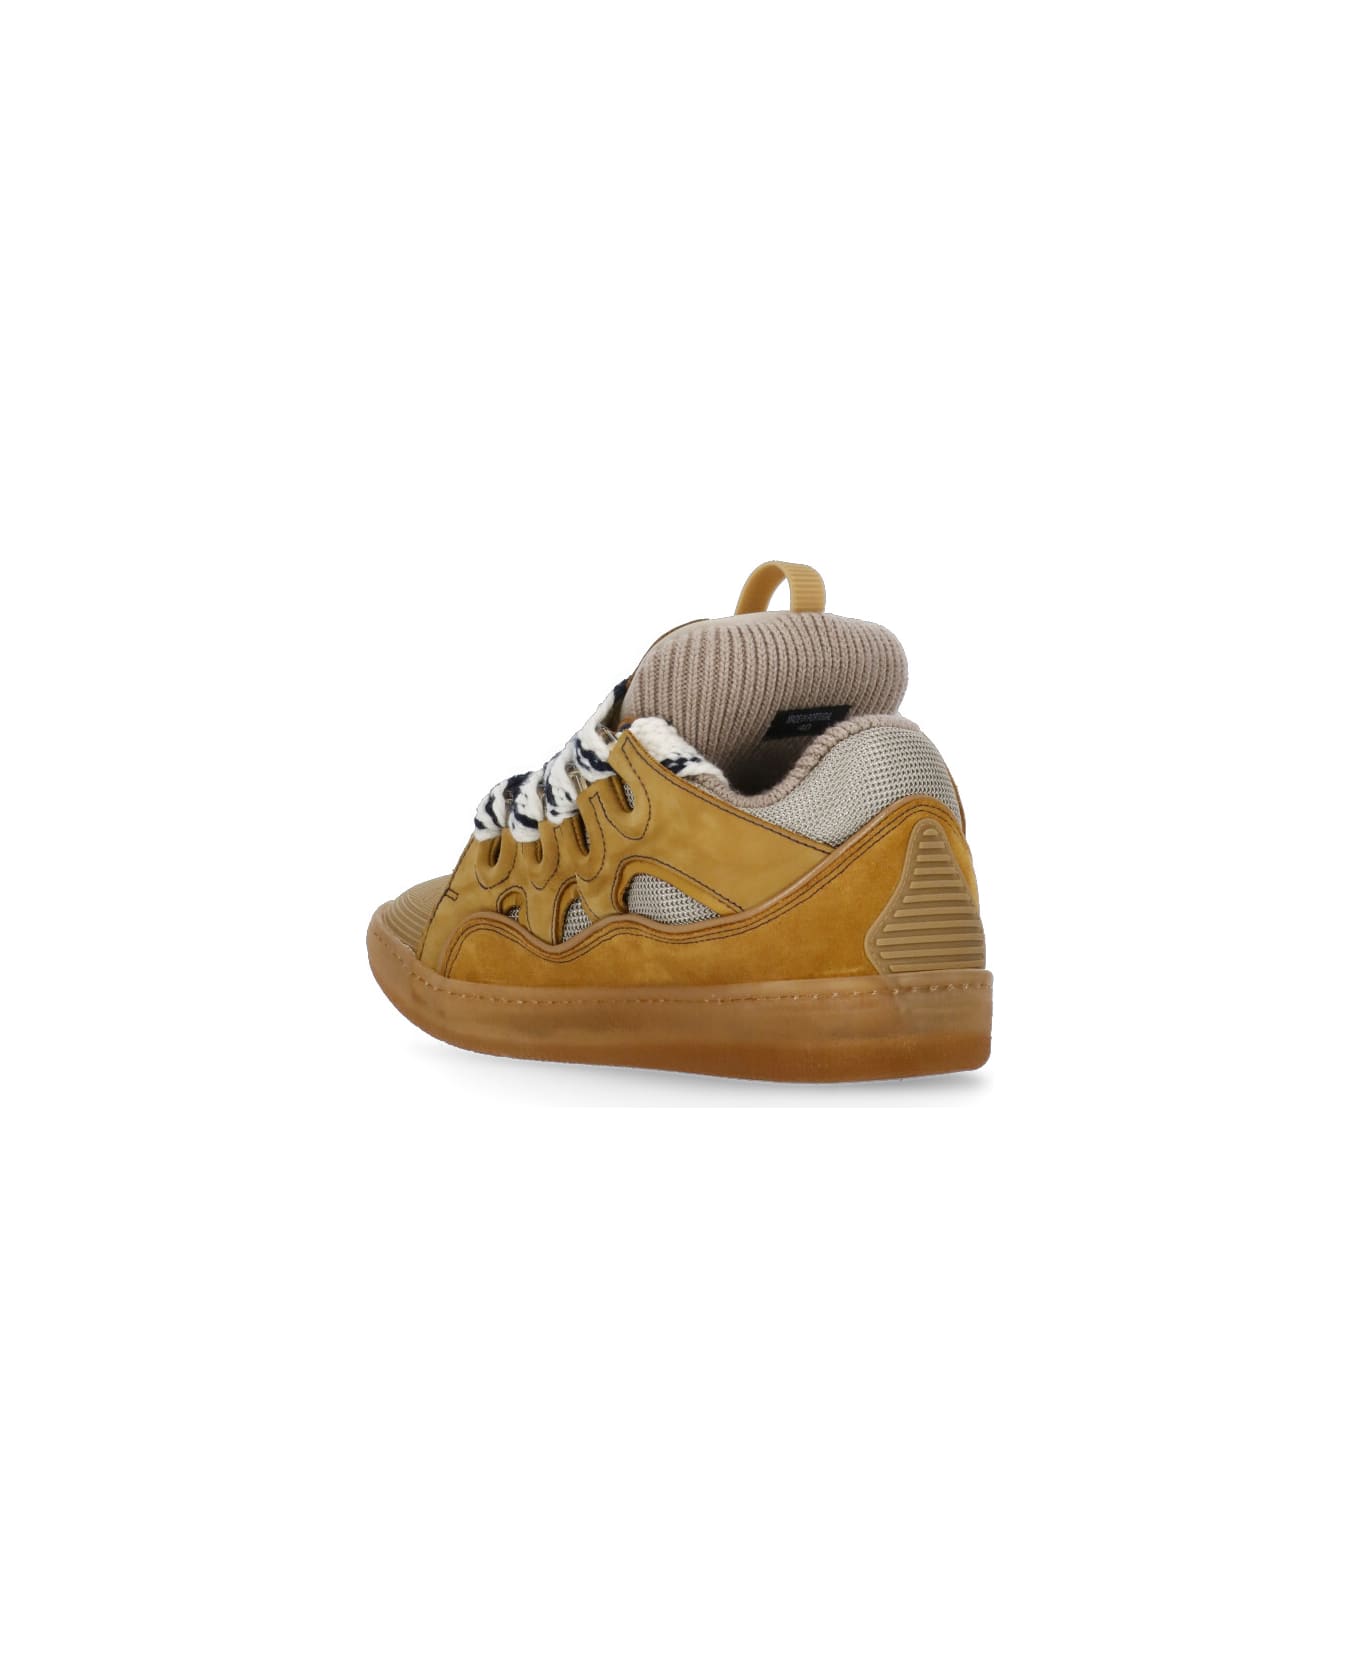 Lanvin Curb Sneakers - Yellow